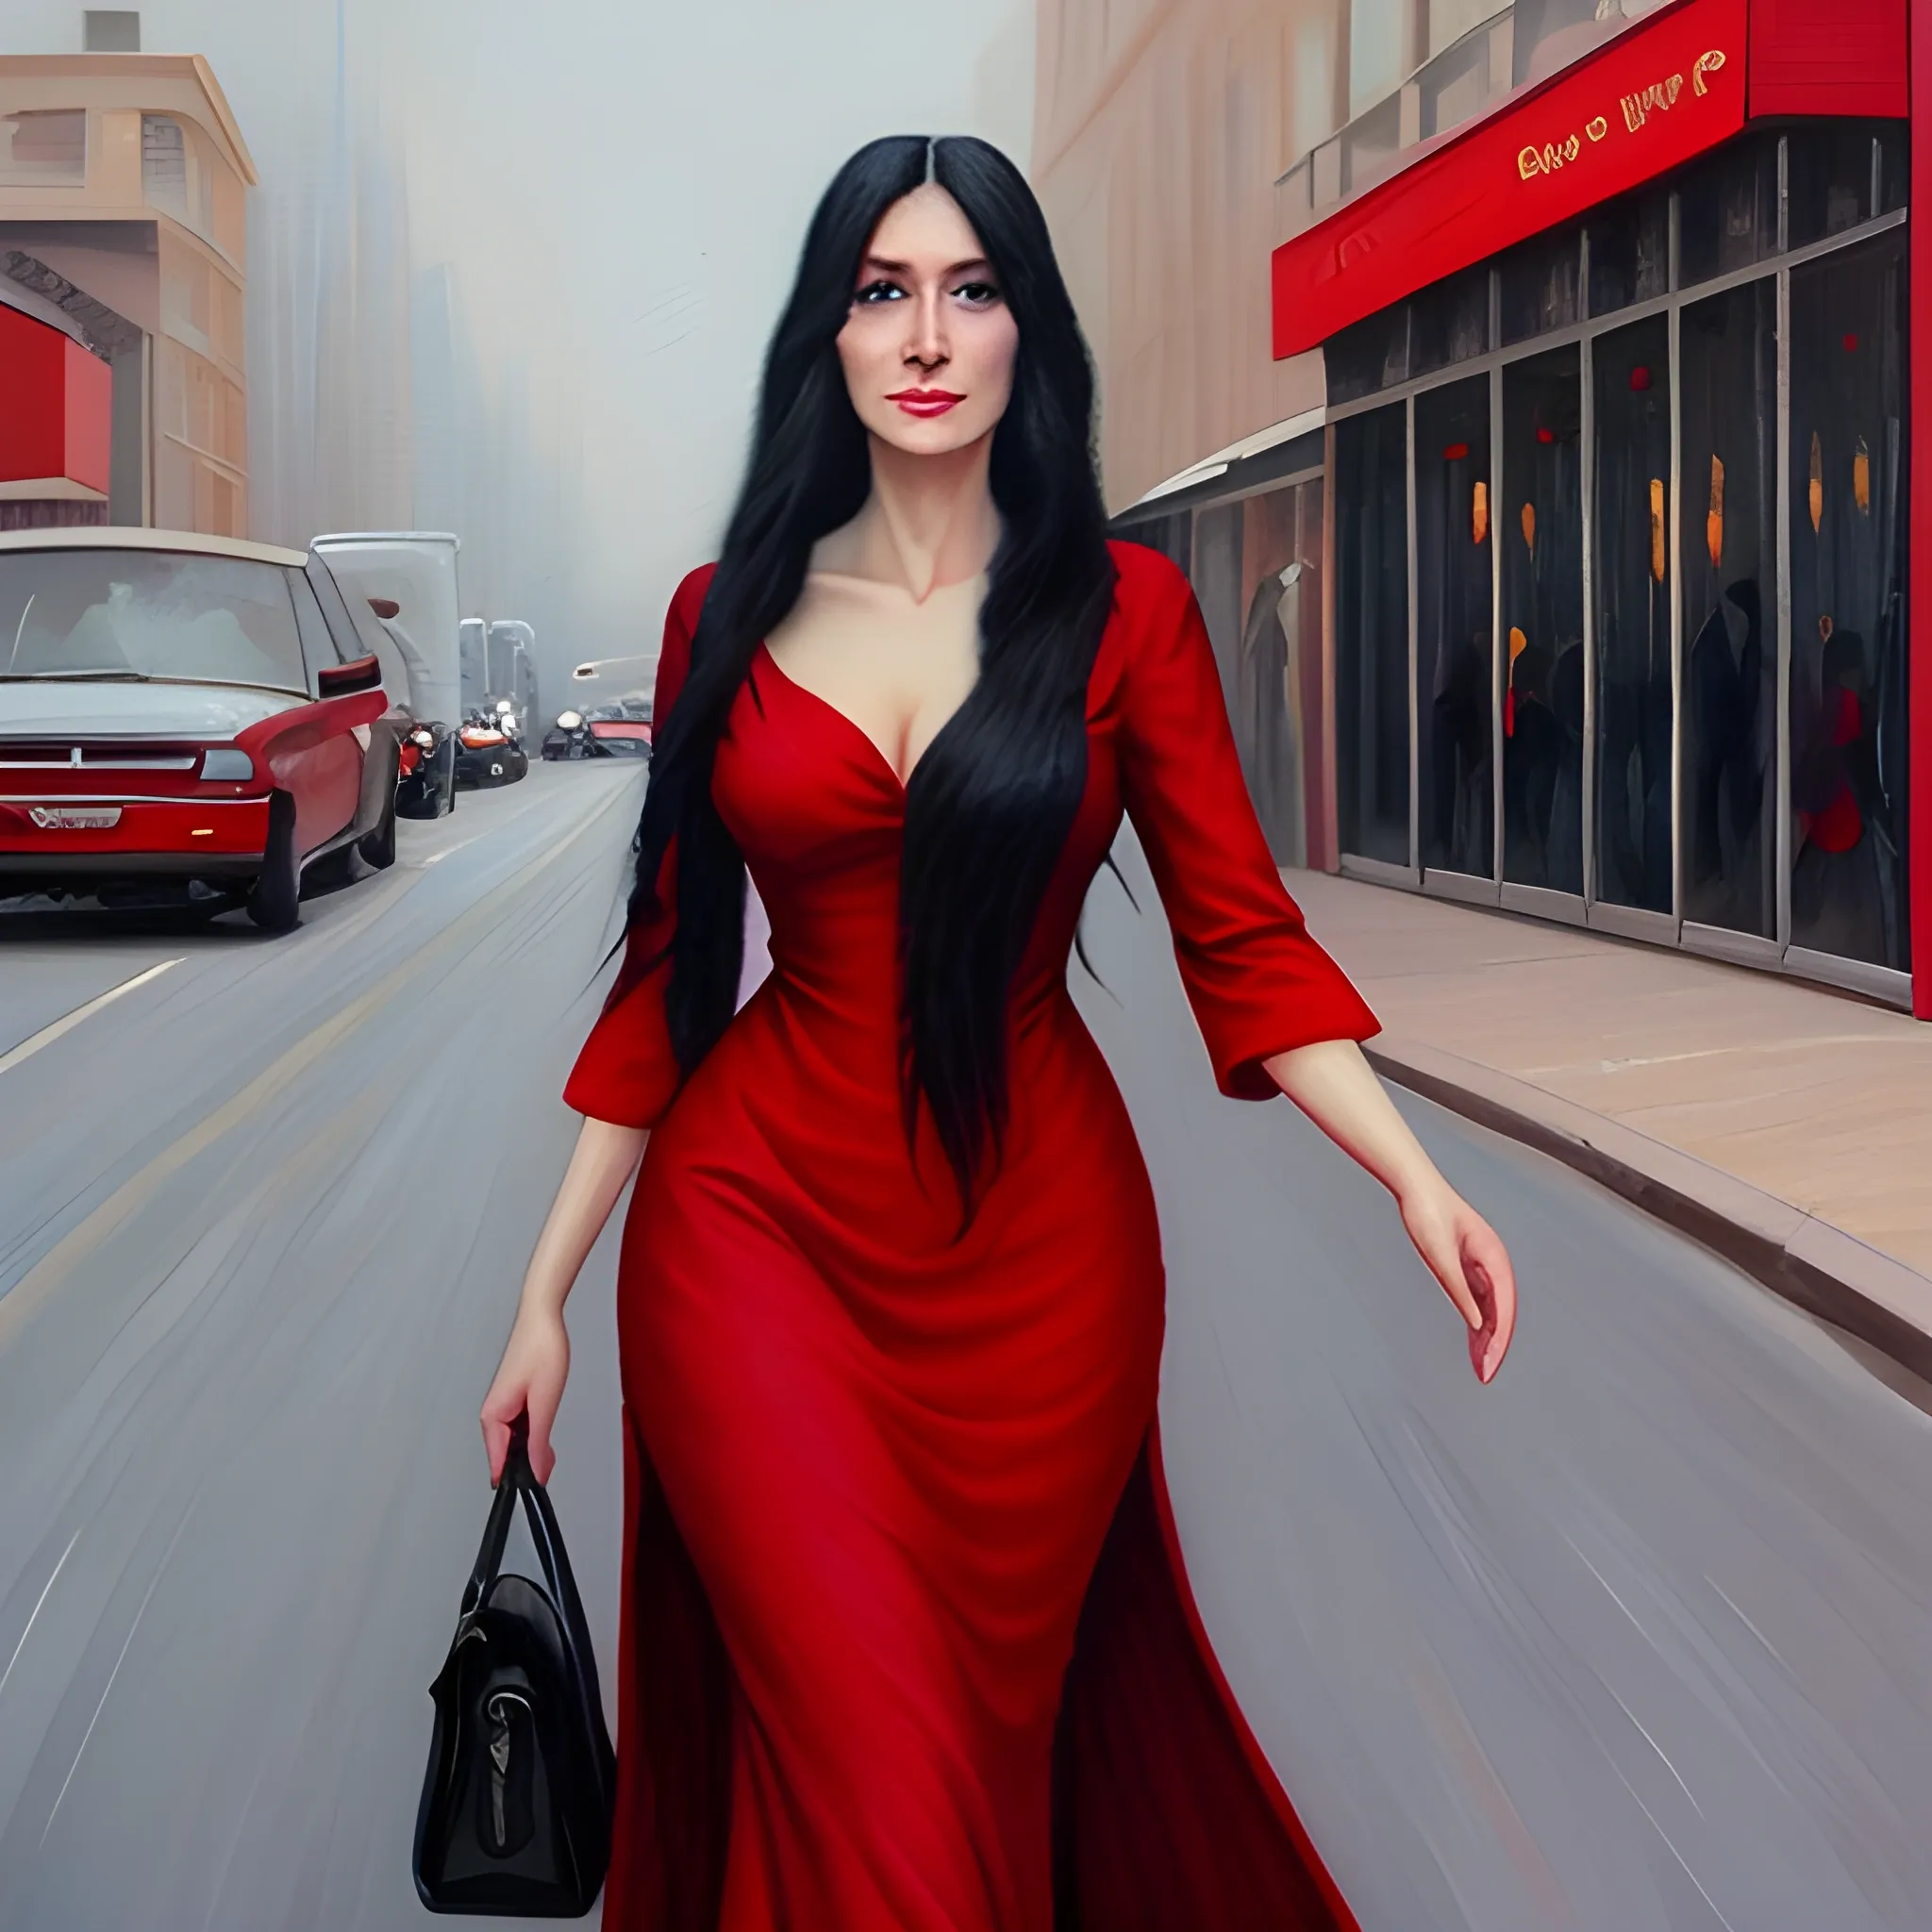 A 40-year-old young woman with long black hair, an innocent and beautiful face, wearing an red long dress, walking on the street, oil painting style